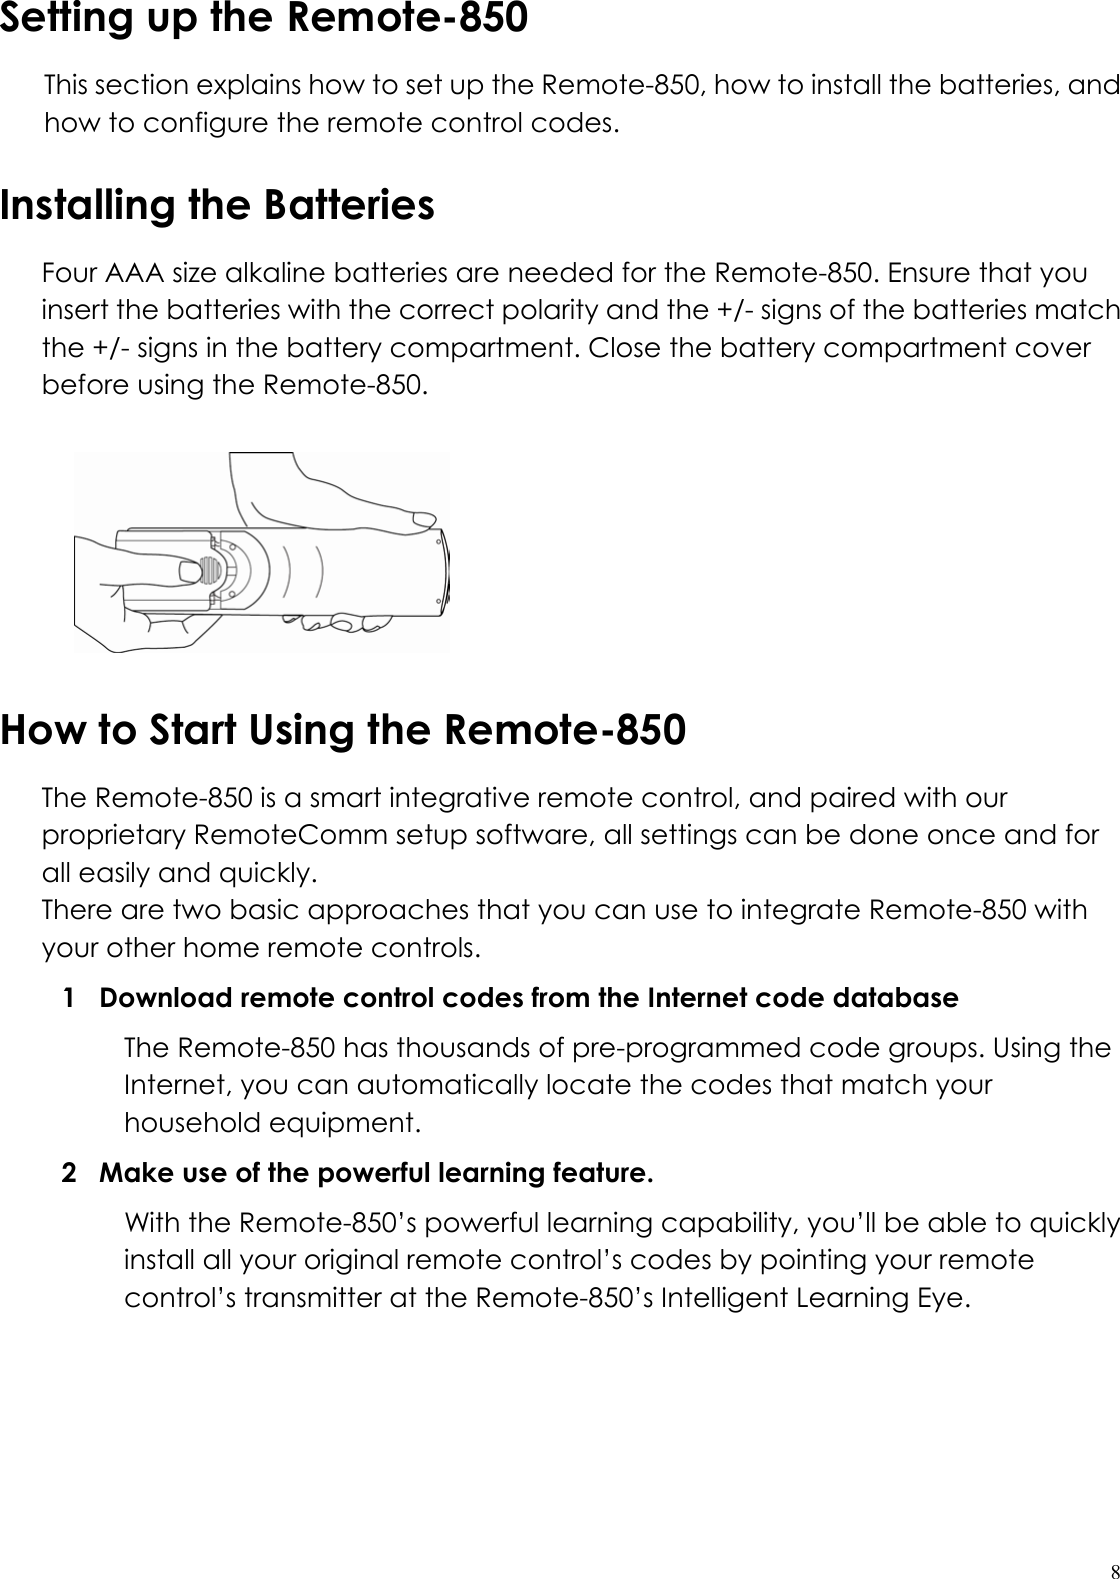  8Setting up the Remote-850 This section explains how to set up the Remote-850, how to install the batteries, and how to configure the remote control codes. Installing the Batteries  Four AAA size alkaline batteries are needed for the Remote-850. Ensure that you insert the batteries with the correct polarity and the +/- signs of the batteries match the +/- signs in the battery compartment. Close the battery compartment cover before using the Remote-850.   How to Start Using the Remote-850 The Remote-850 is a smart integrative remote control, and paired with our proprietary RemoteComm setup software, all settings can be done once and for all easily and quickly. There are two basic approaches that you can use to integrate Remote-850 with your other home remote controls. 1  Download remote control codes from the Internet code database   The Remote-850 has thousands of pre-programmed code groups. Using the Internet, you can automatically locate the codes that match your household equipment. 2  Make use of the powerful learning feature.   With the Remote-850’s powerful learning capability, you’ll be able to quickly install all your original remote control’s codes by pointing your remote control’s transmitter at the Remote-850’s Intelligent Learning Eye. 